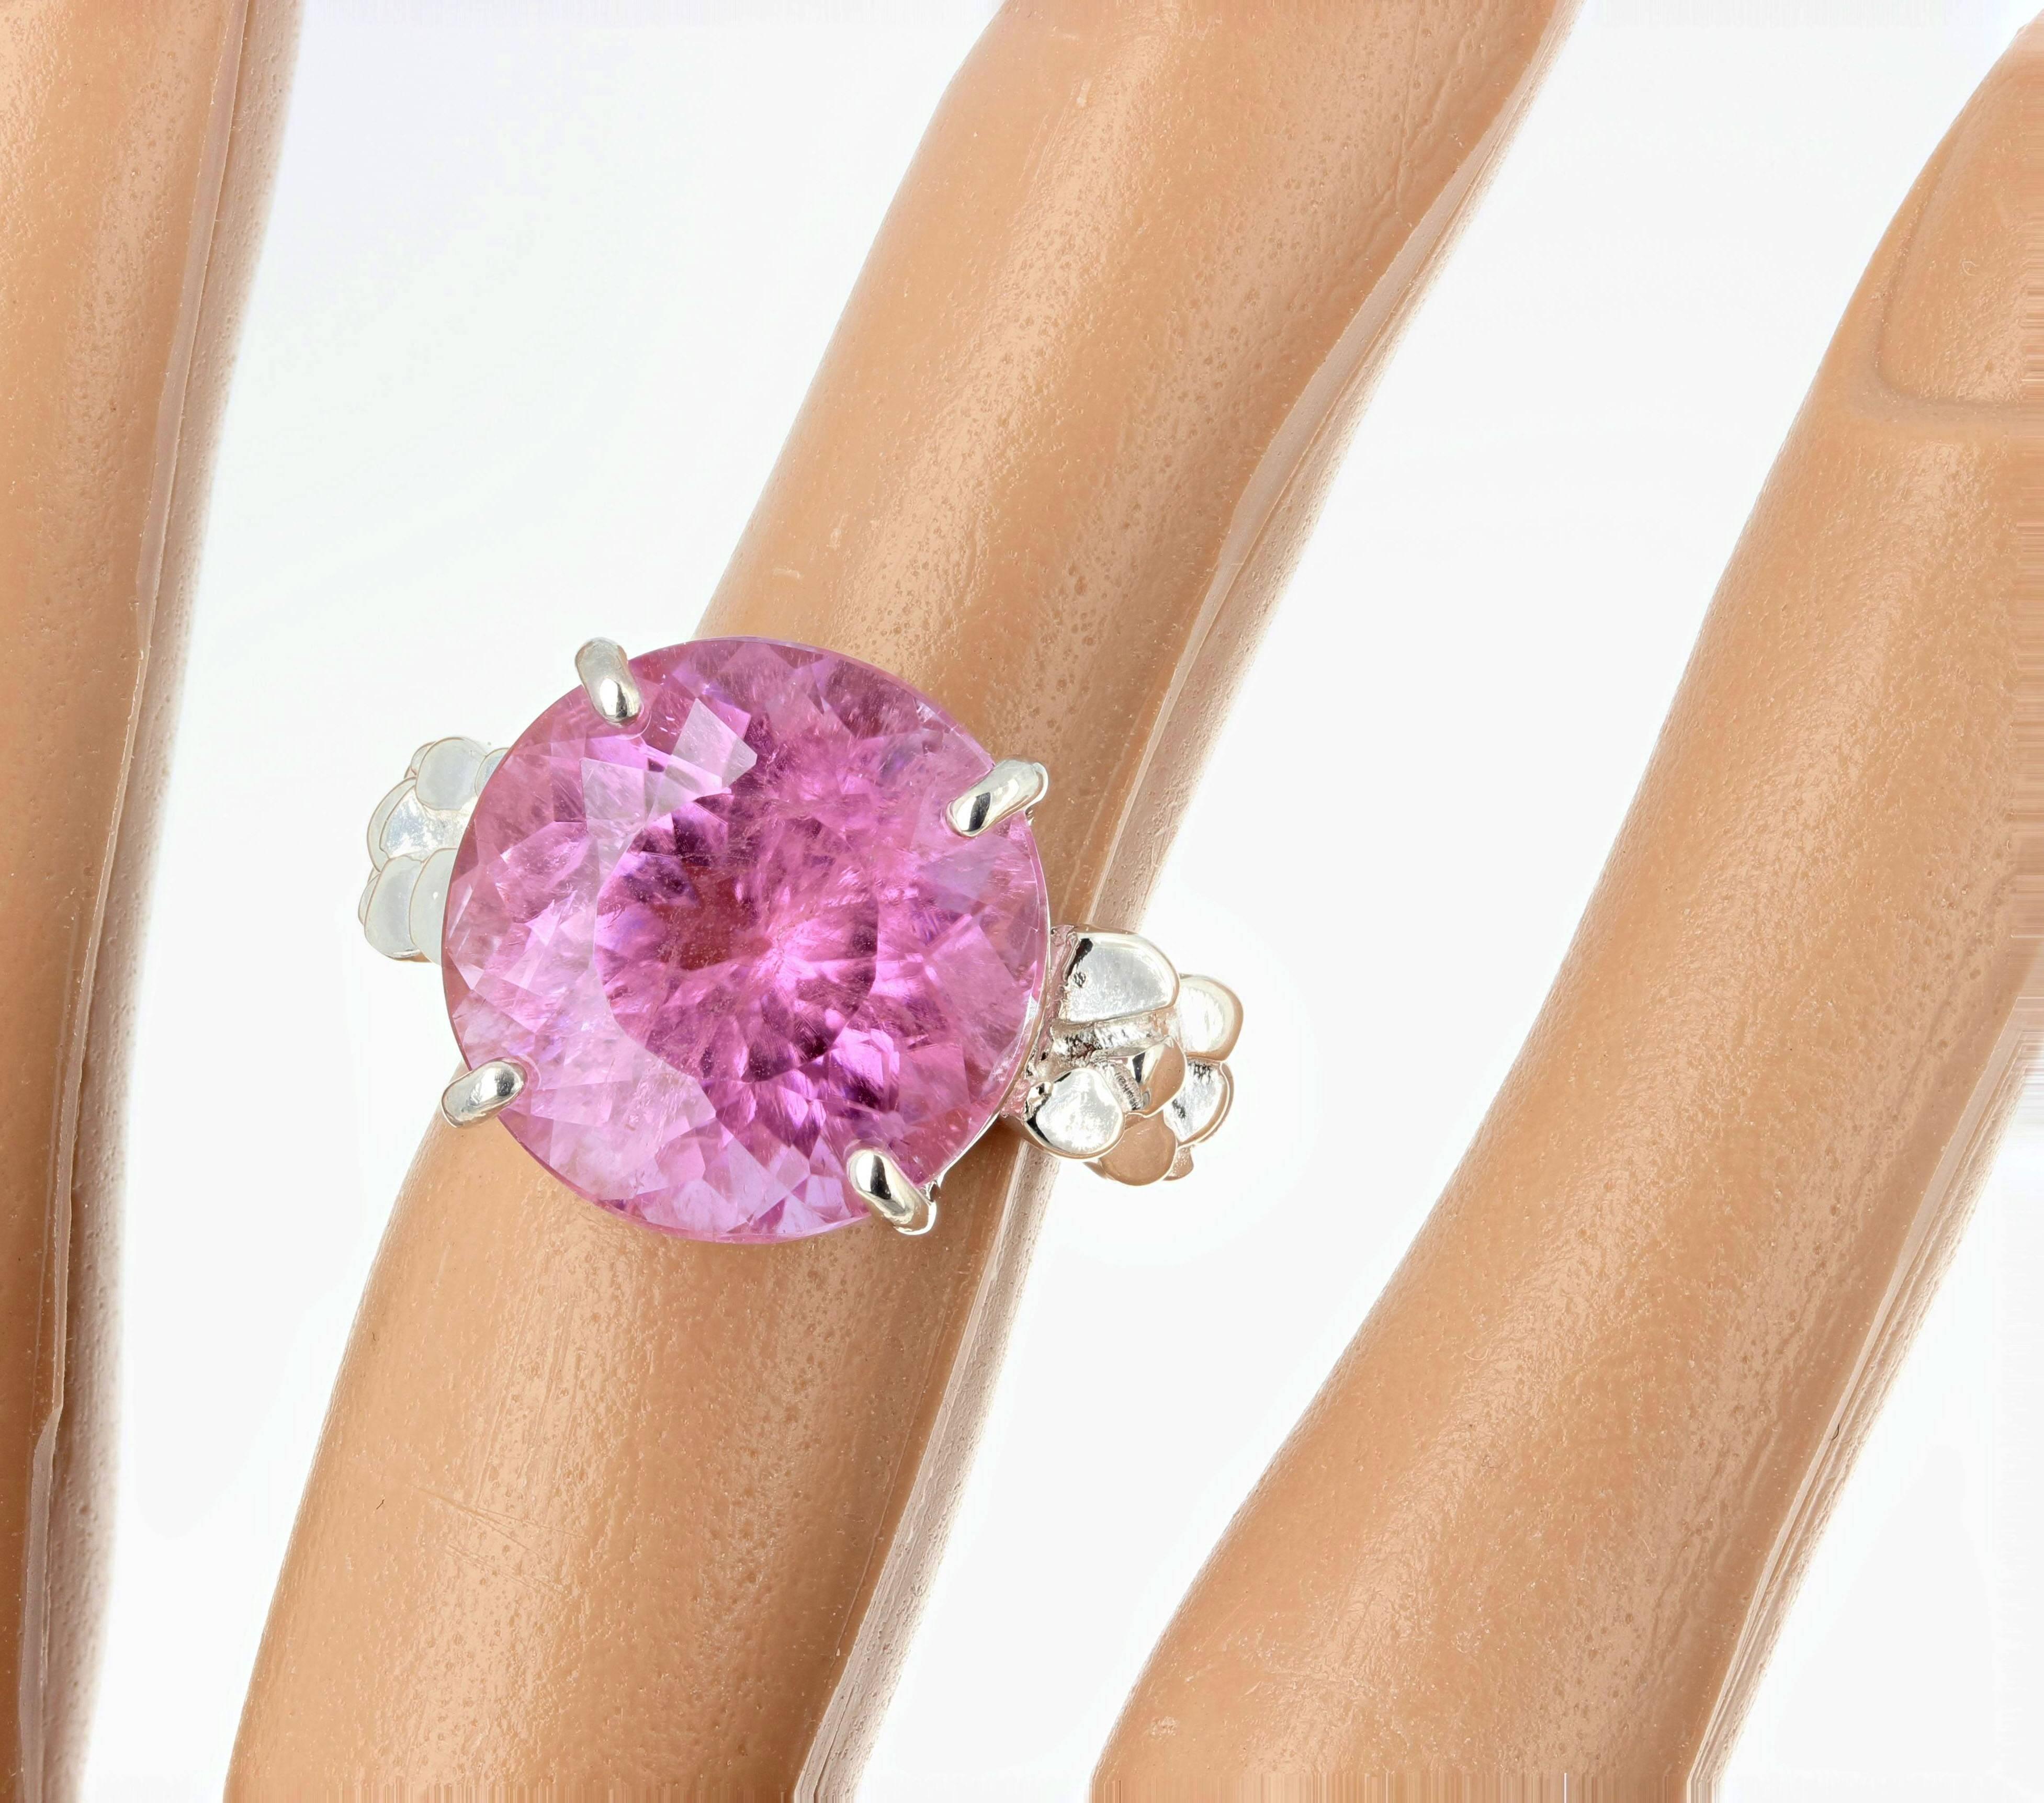 Unique Glittering brilliant pinky round 13.5 carat natural Kunzite (14.8 mm) set in a sterling silver handmade ring size 6 (sizable).  By looking at the photo on the finger/hand you can see that this is truly magnificent to wear to all special